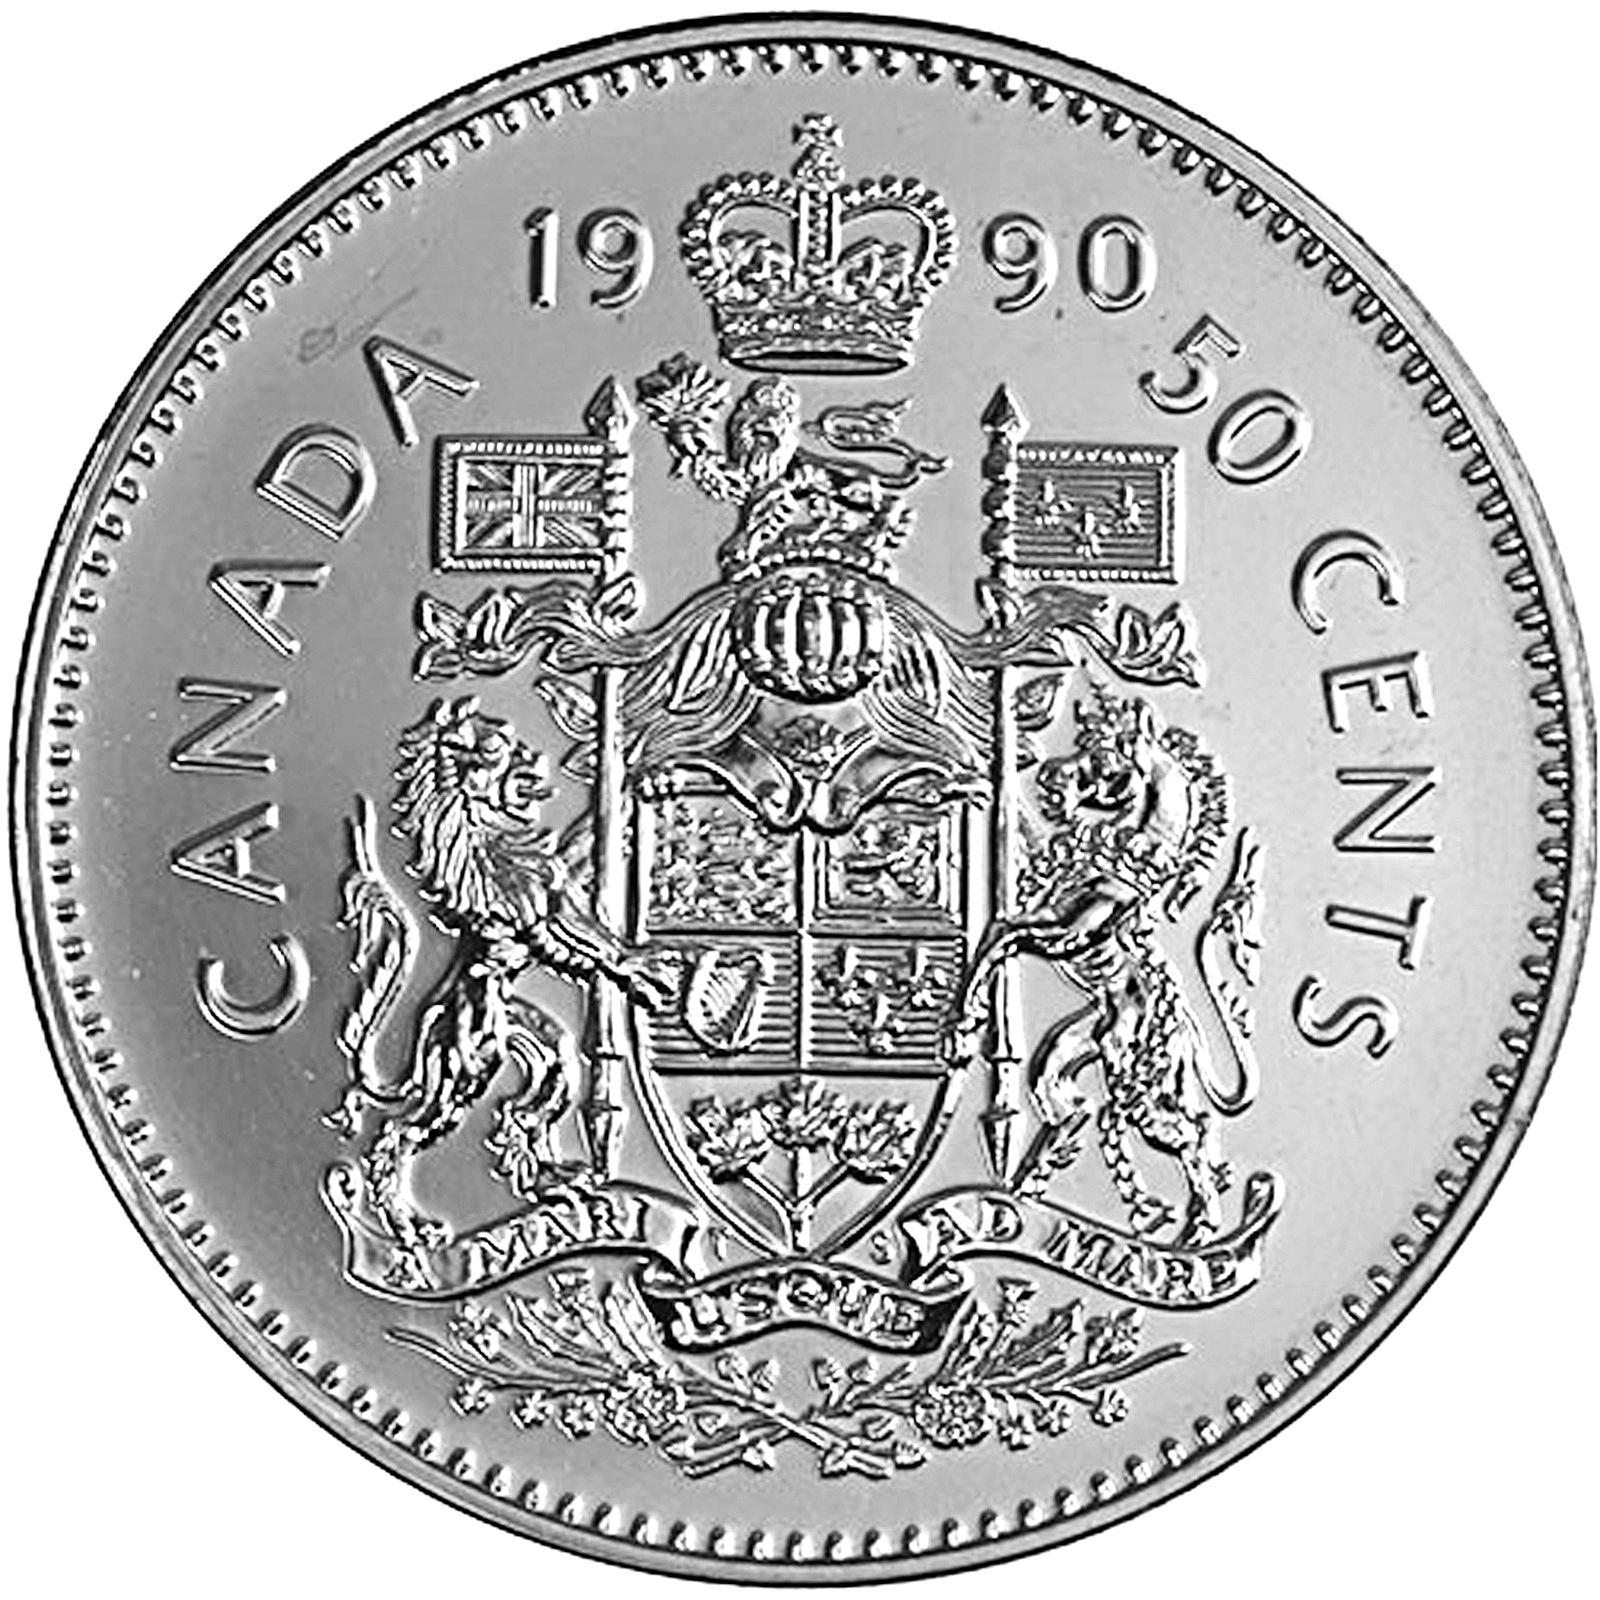 Details about   2020 Canada 50 cent Coat of arms logo - BU finish from roll 